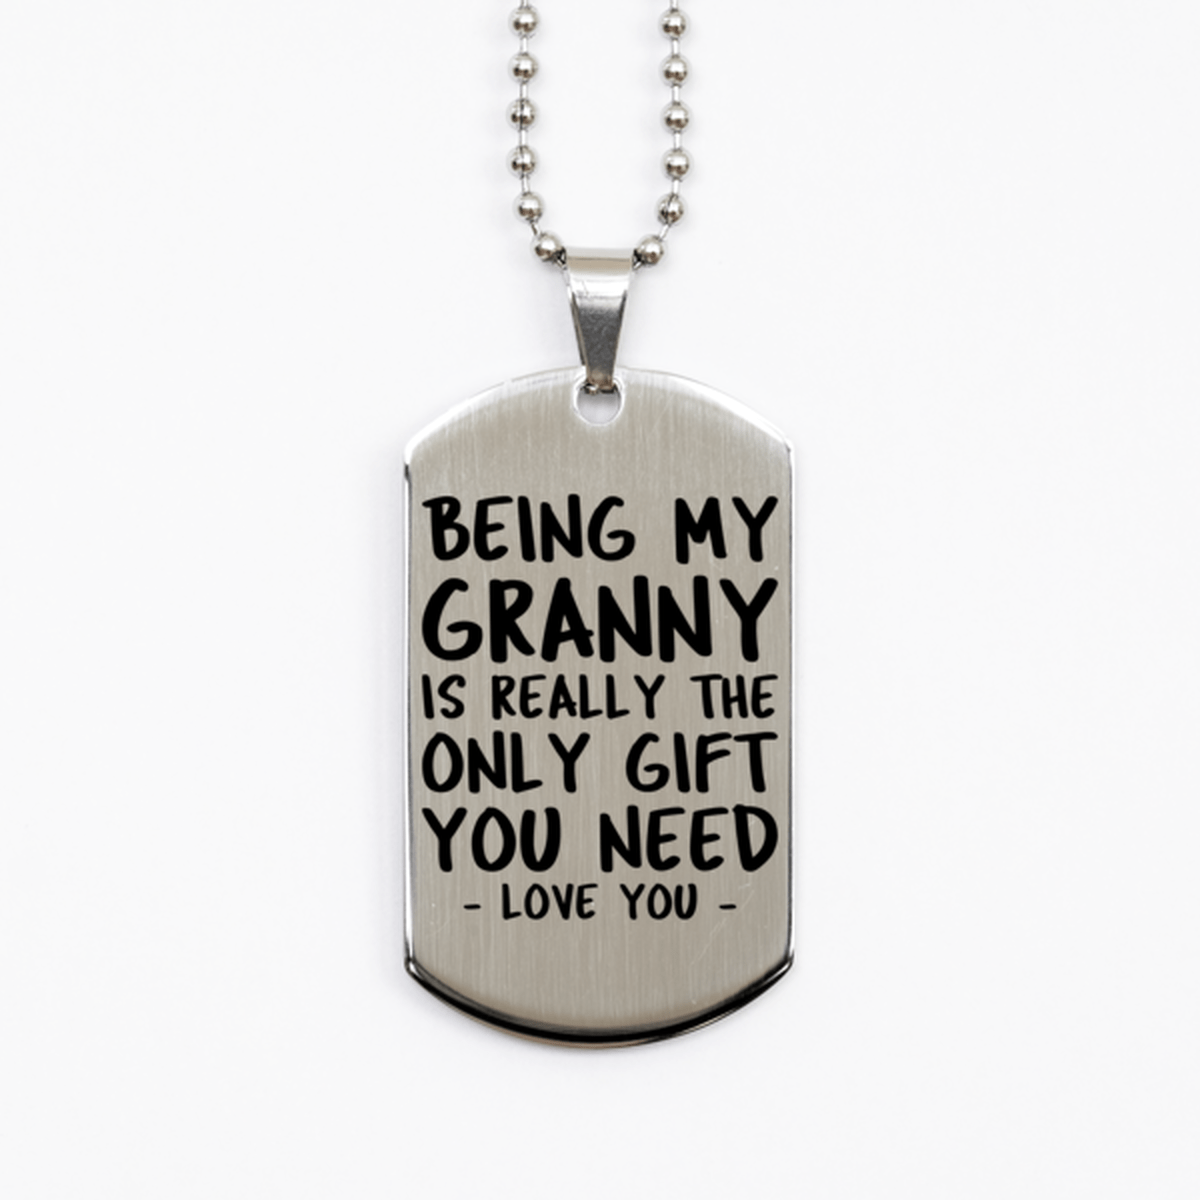 Funny Granny Silver Dog Tag Necklace, Being My Granny Is Really the Only Gift You Need, Best Birthday Gifts for Granny